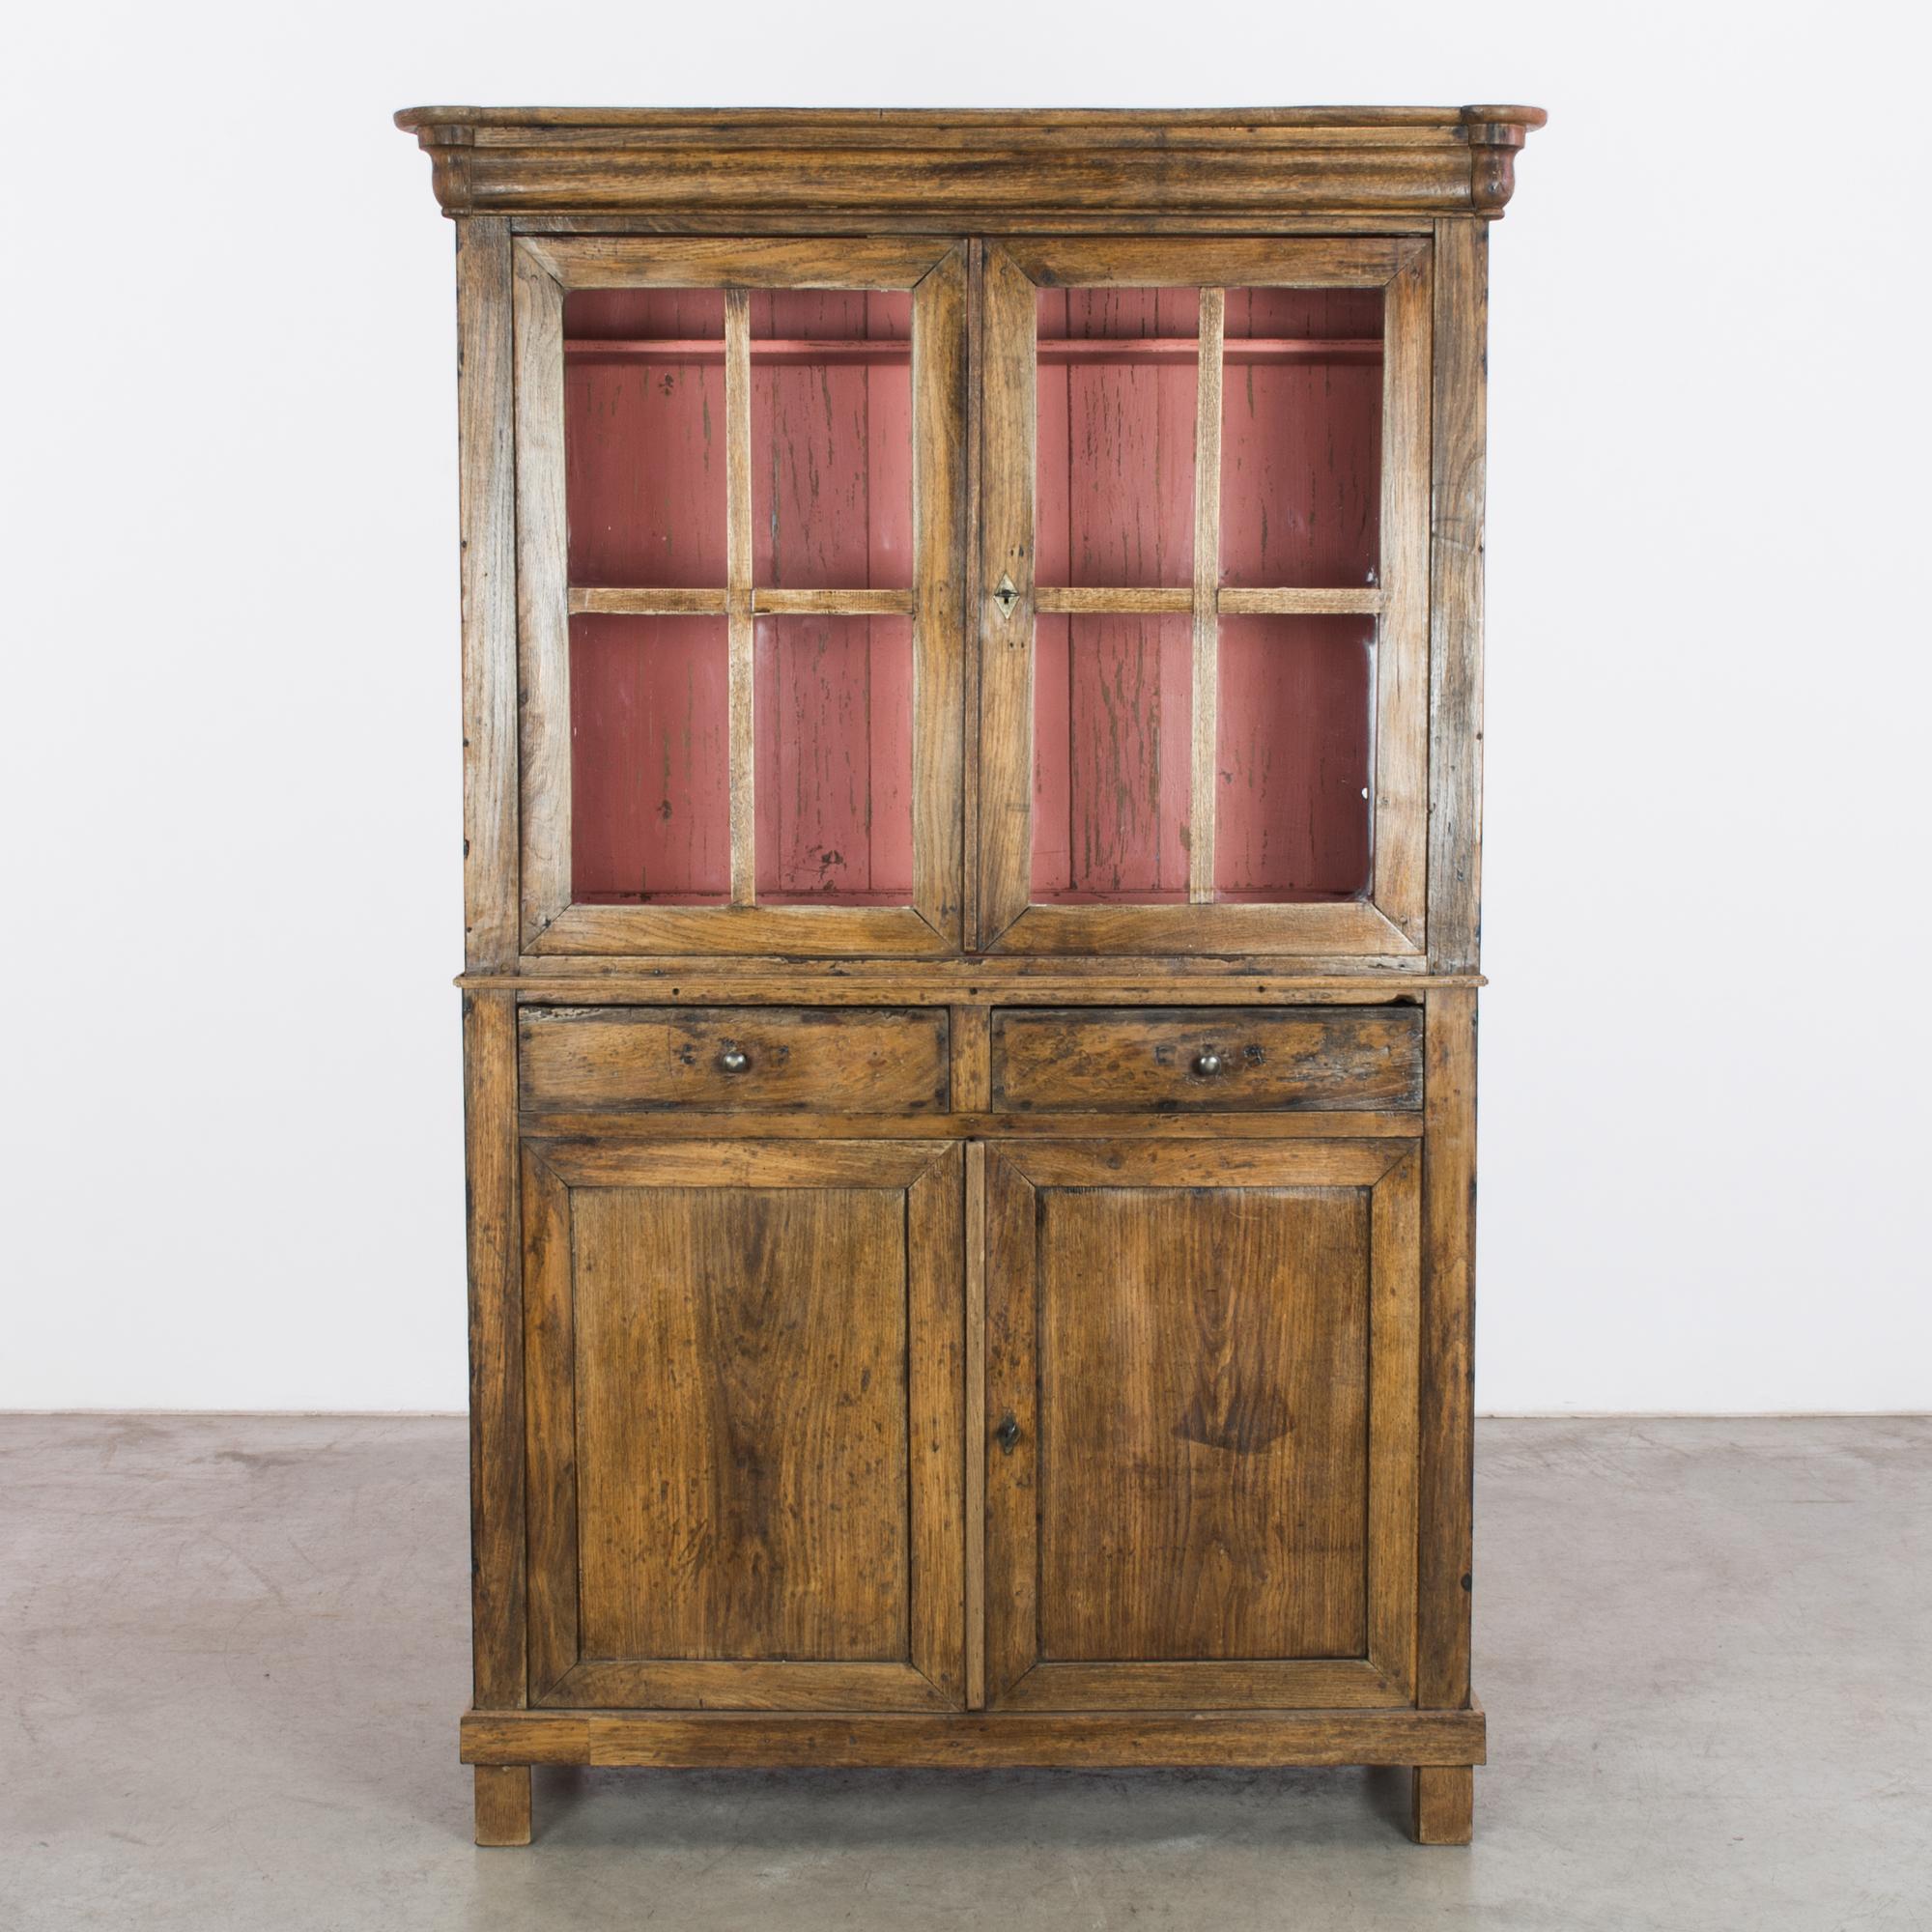 A wooden vitrine from France, circa 1880. A handsome cabinet of polished oak with a lower cupboard, twin drawers and two paned windows which peep onto a rose pink interior. The dusky tone and gentle weathering of the pink paint makes a sweet